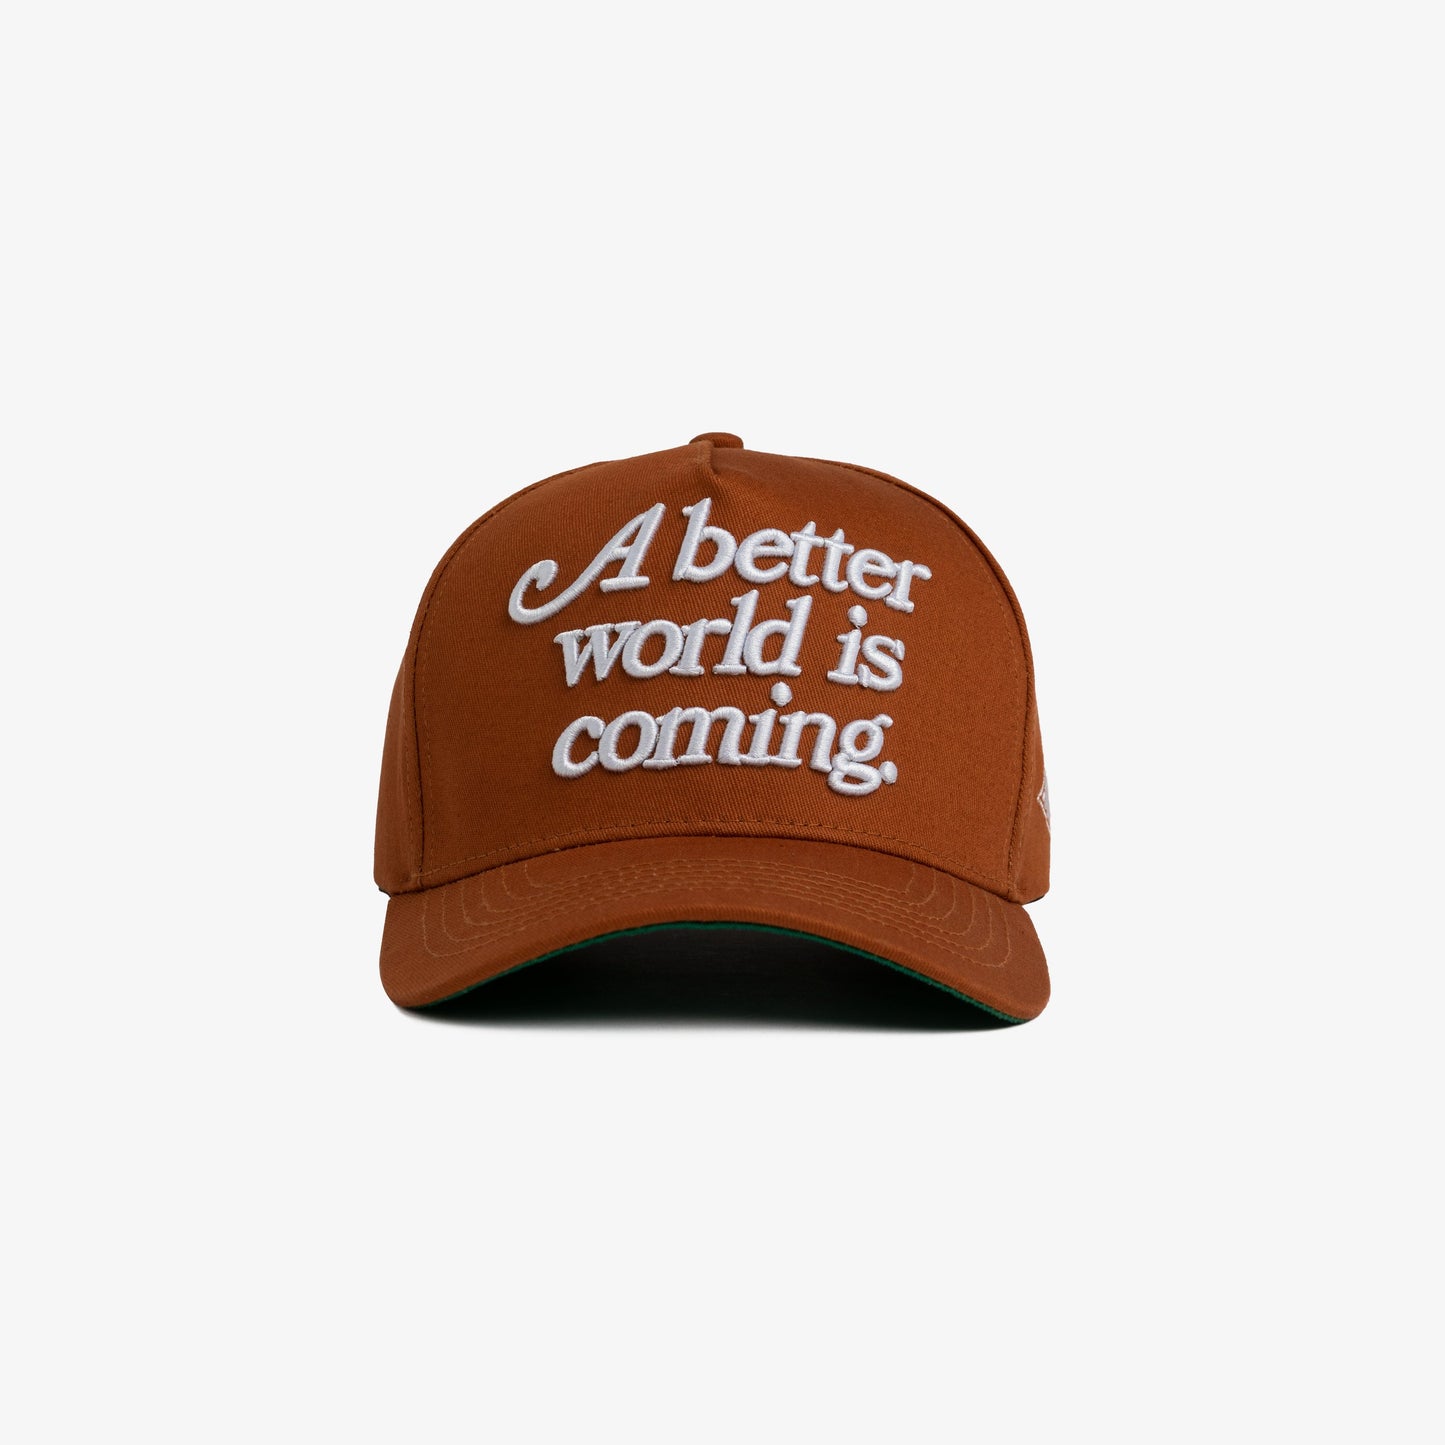 A Better World is Coming Cap (6 Colors)